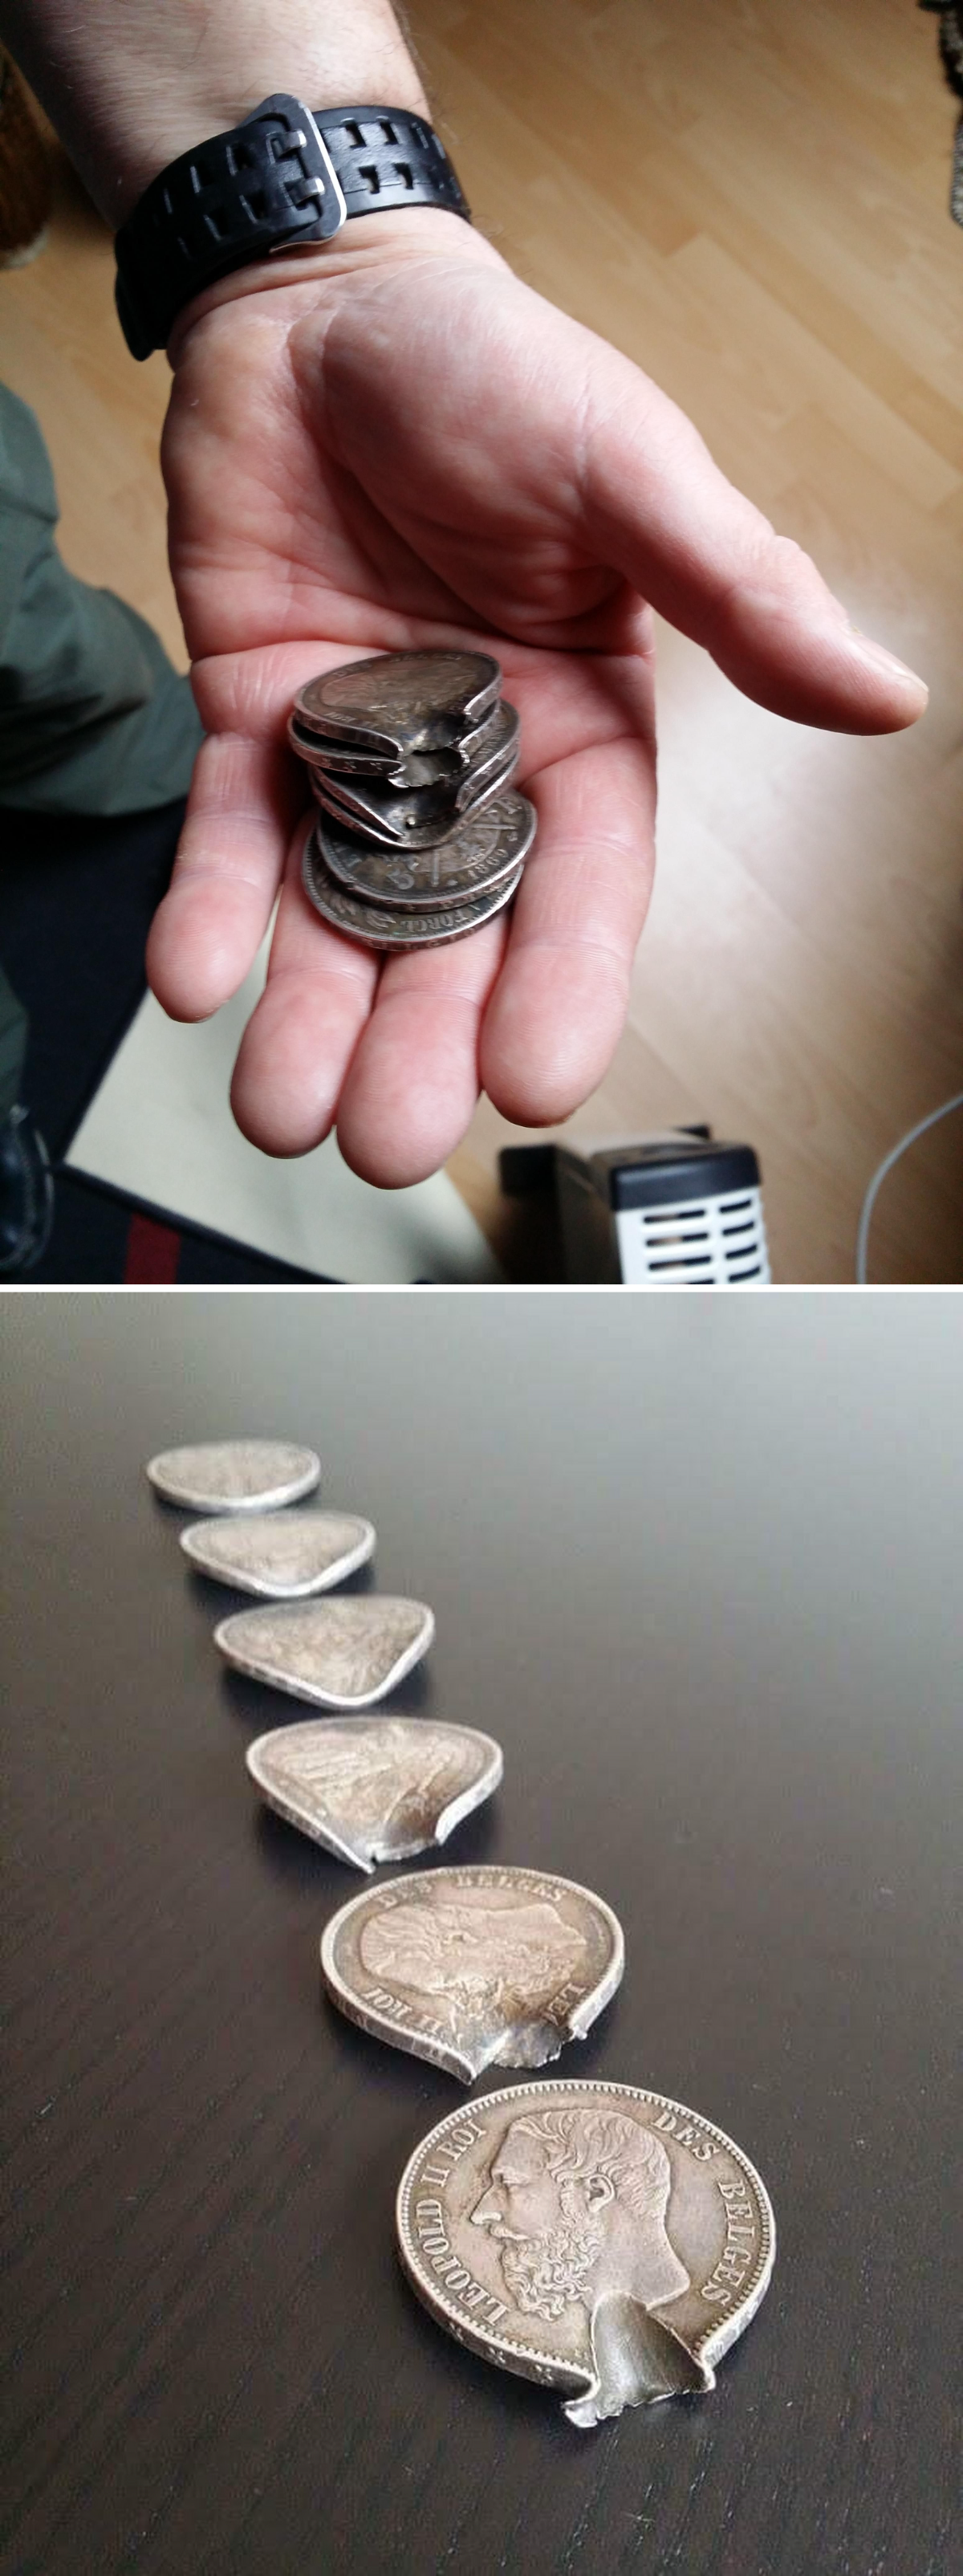 These coins were in the pocket of a Belgian soldier named Optatius Buyssens, they stopped a bullet and saved his life during WW1.png